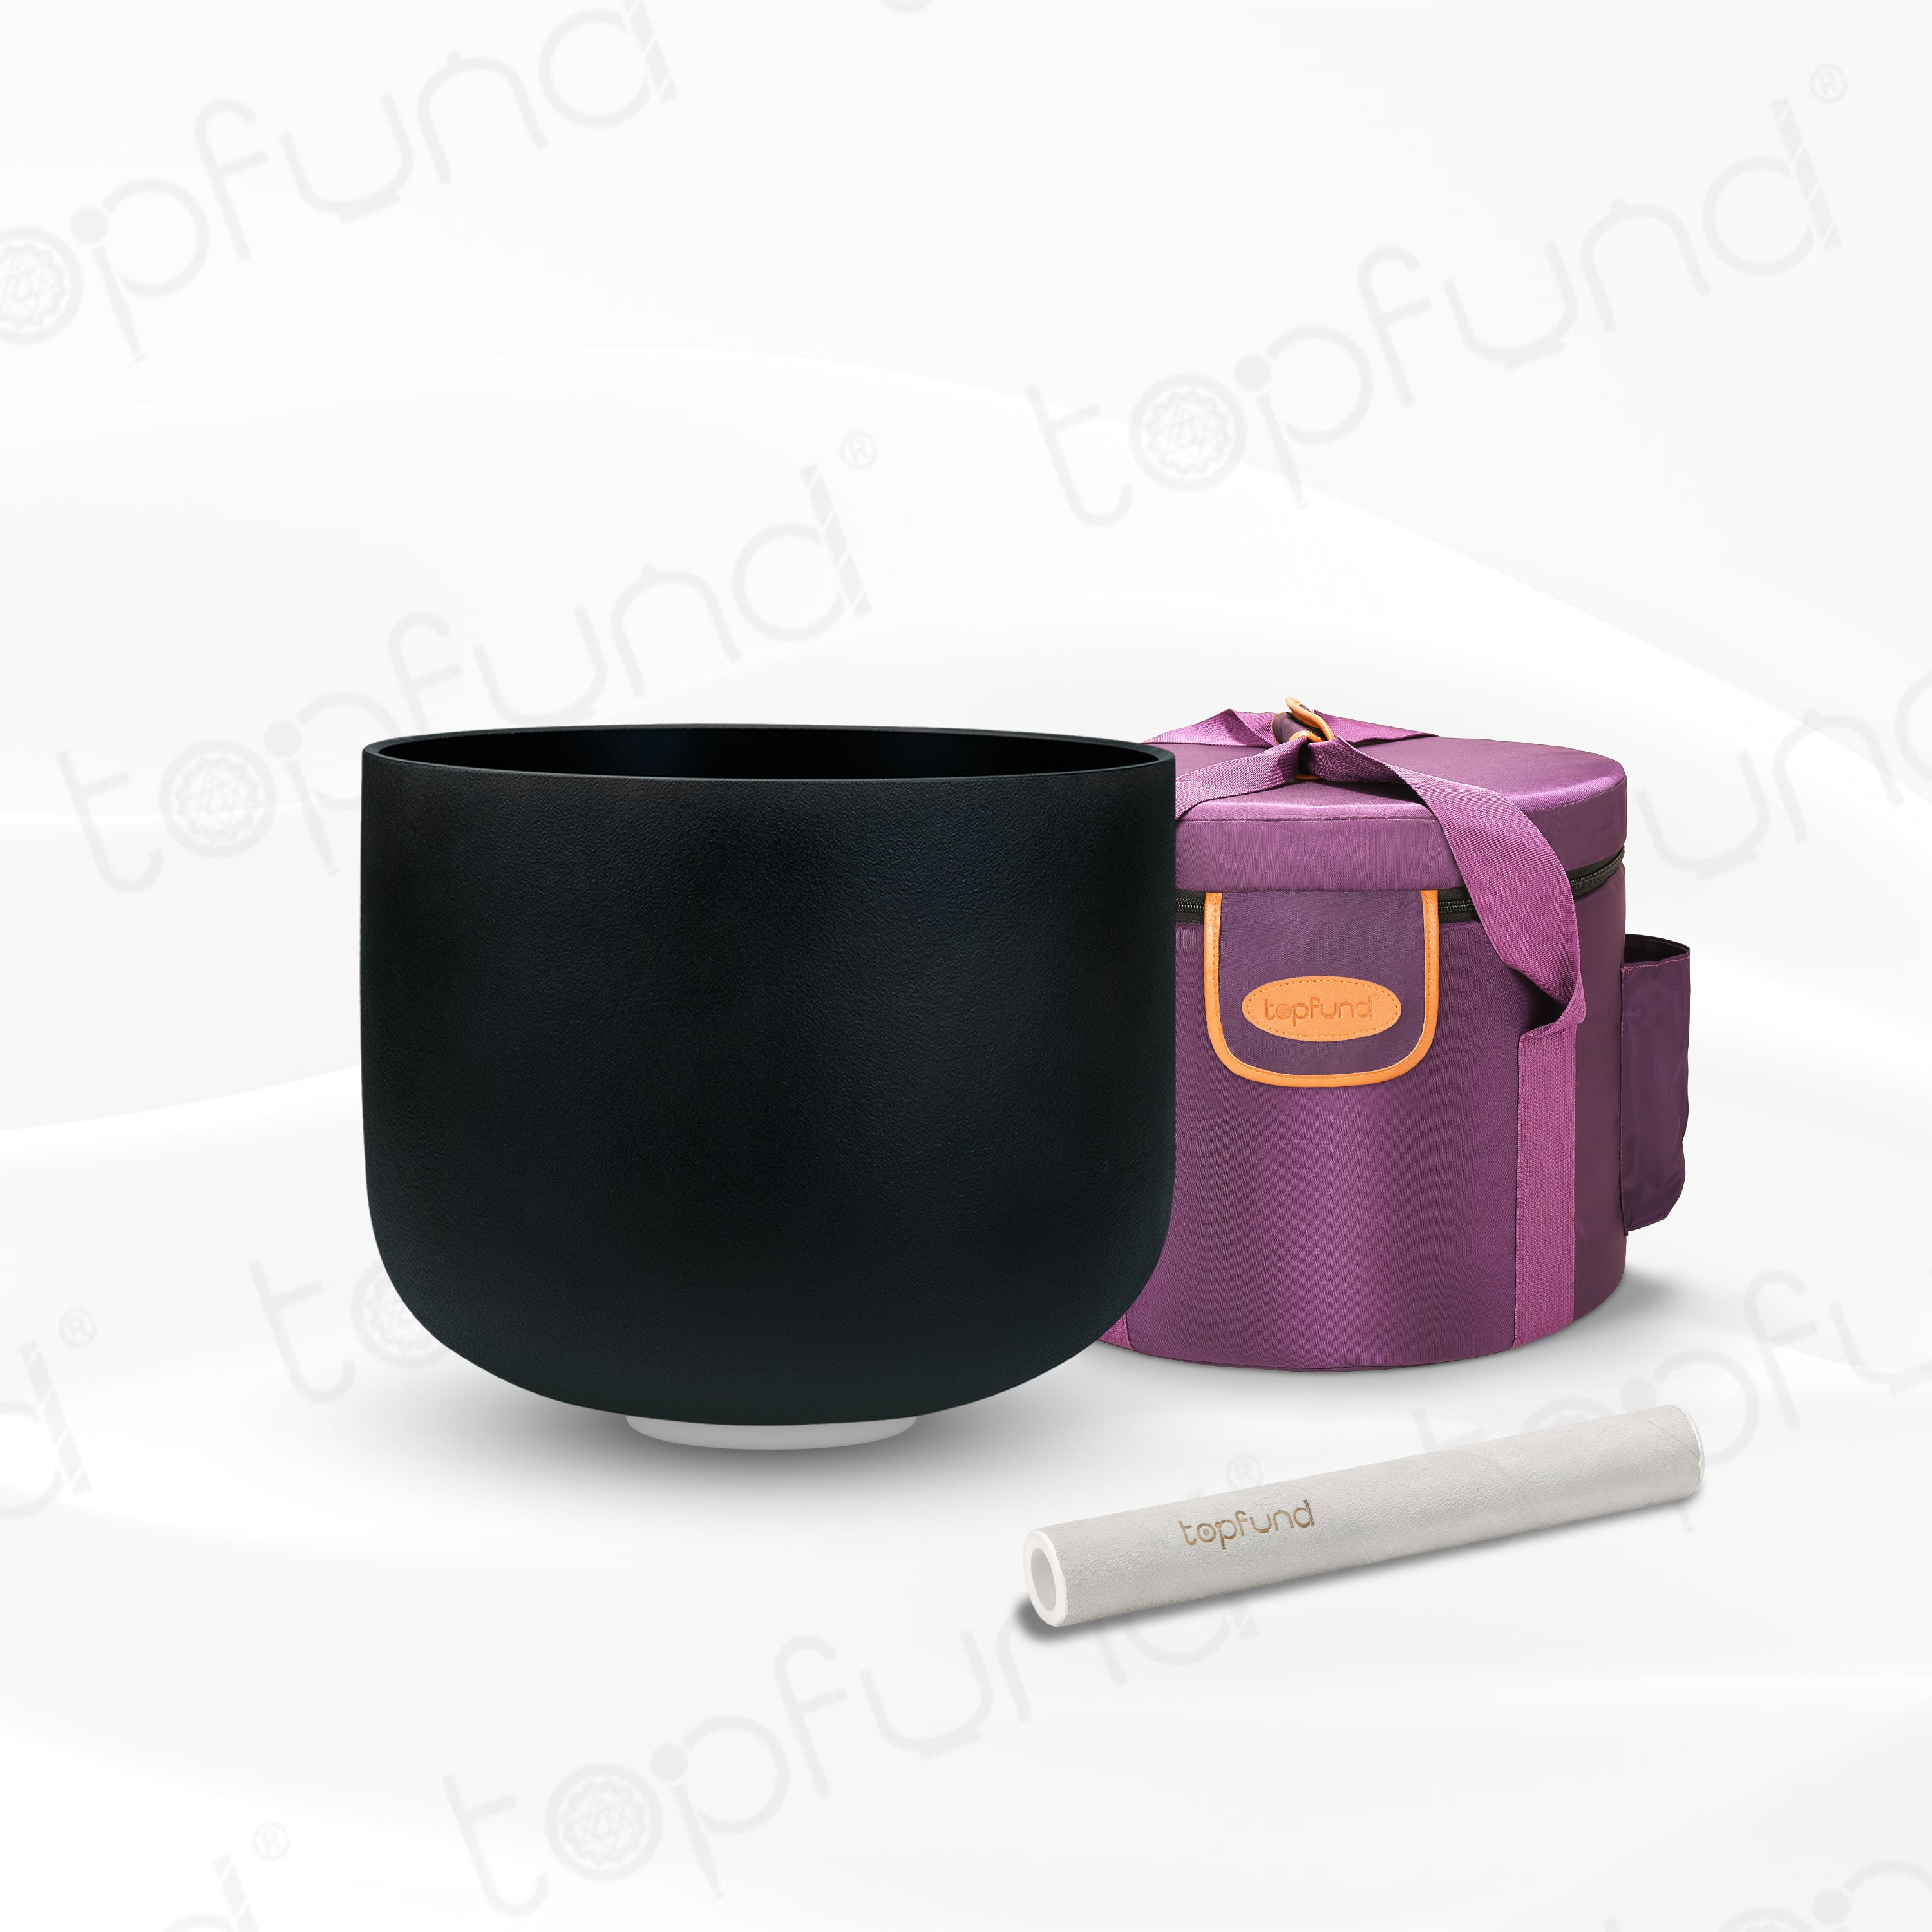 TOPFUND 440 Hz Black C Note Crystal Singing Bowl Root Chakra 14 inch with Artificial Leather Carrying Case and Singing Bowl Mallet Suede Striker - TOPFUND Crystal Singing Bowl